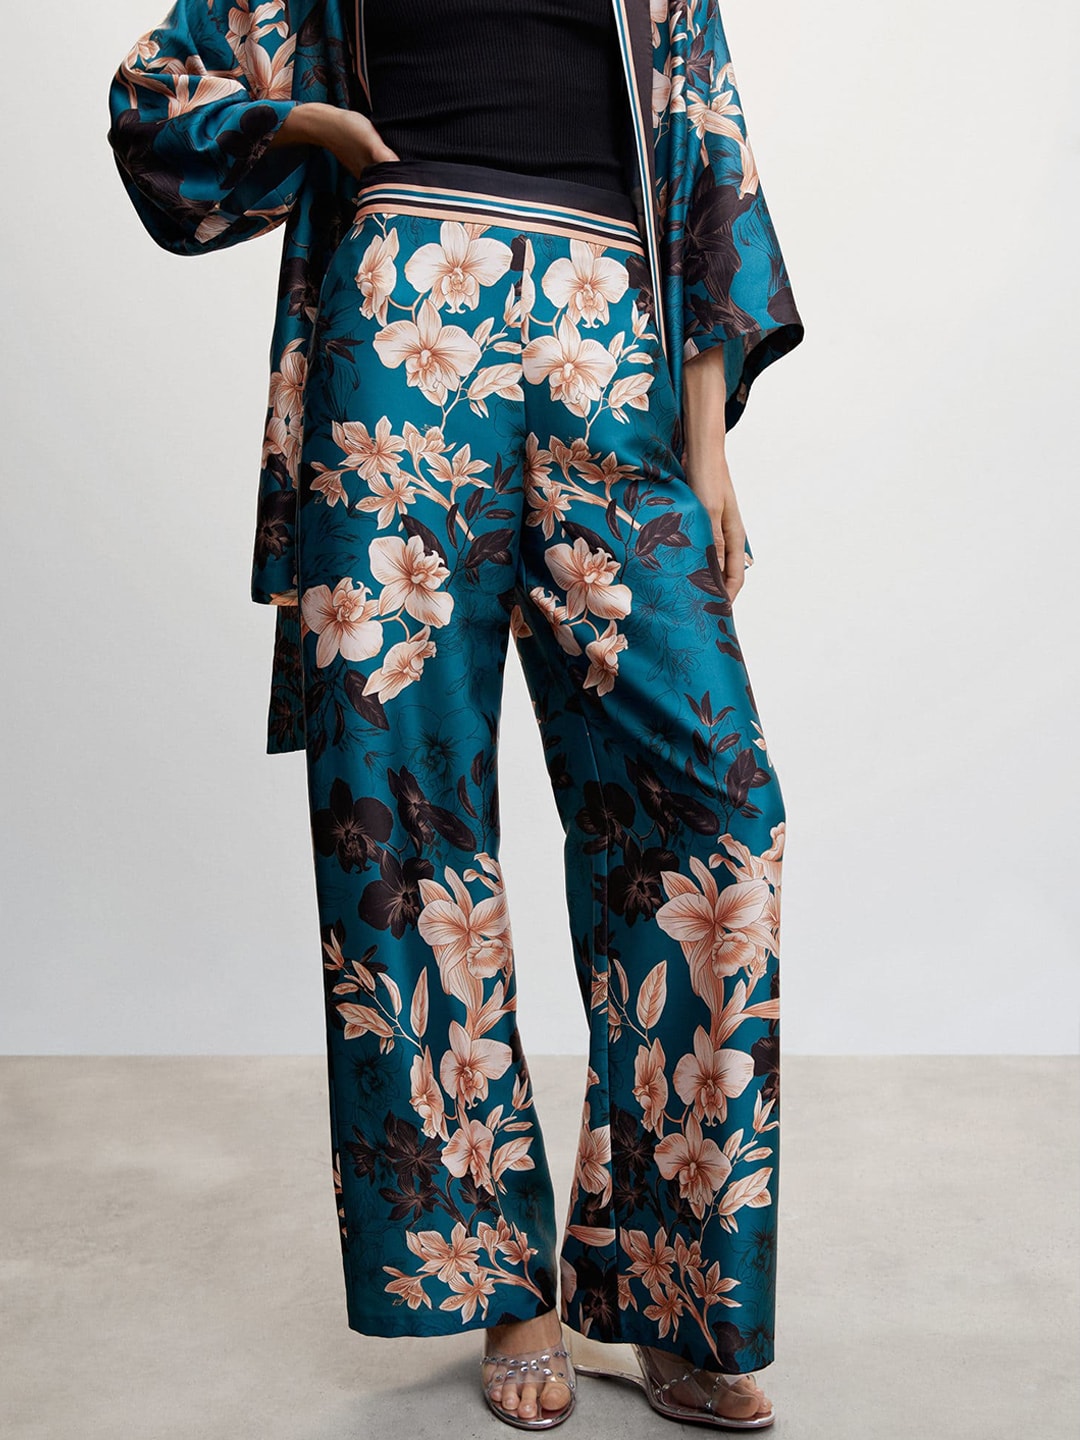 MANGO Women Floral Print Satin Finish Trousers Price in India